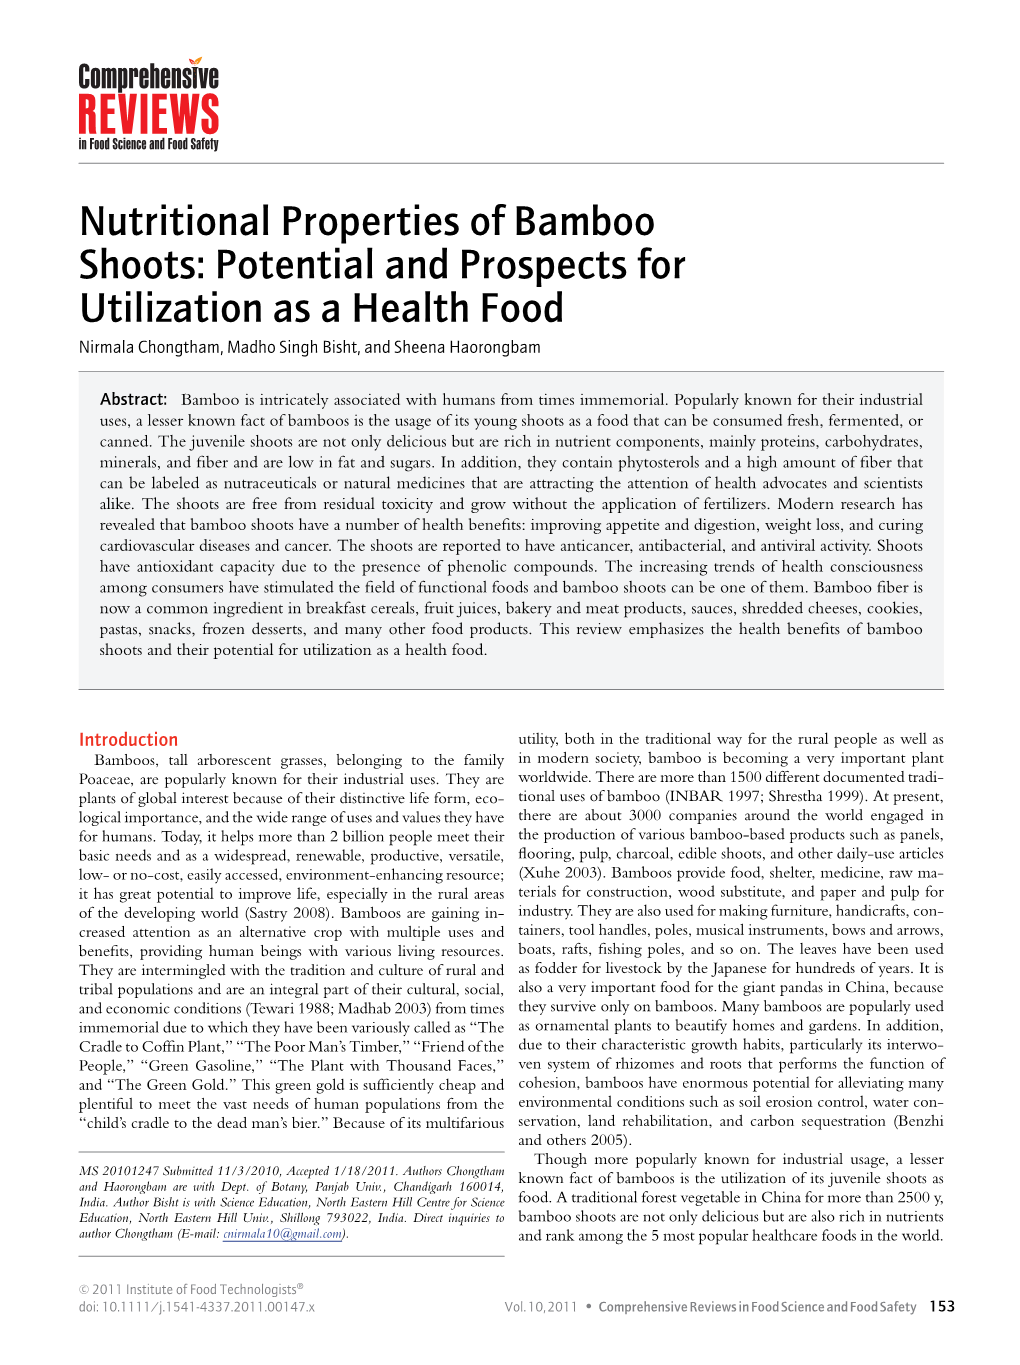 Nutritional Properties of Bamboo Shoots: Potential and Prospects for Utilization As a Health Food Nirmala Chongtham, Madho Singh Bisht, and Sheena Haorongbam